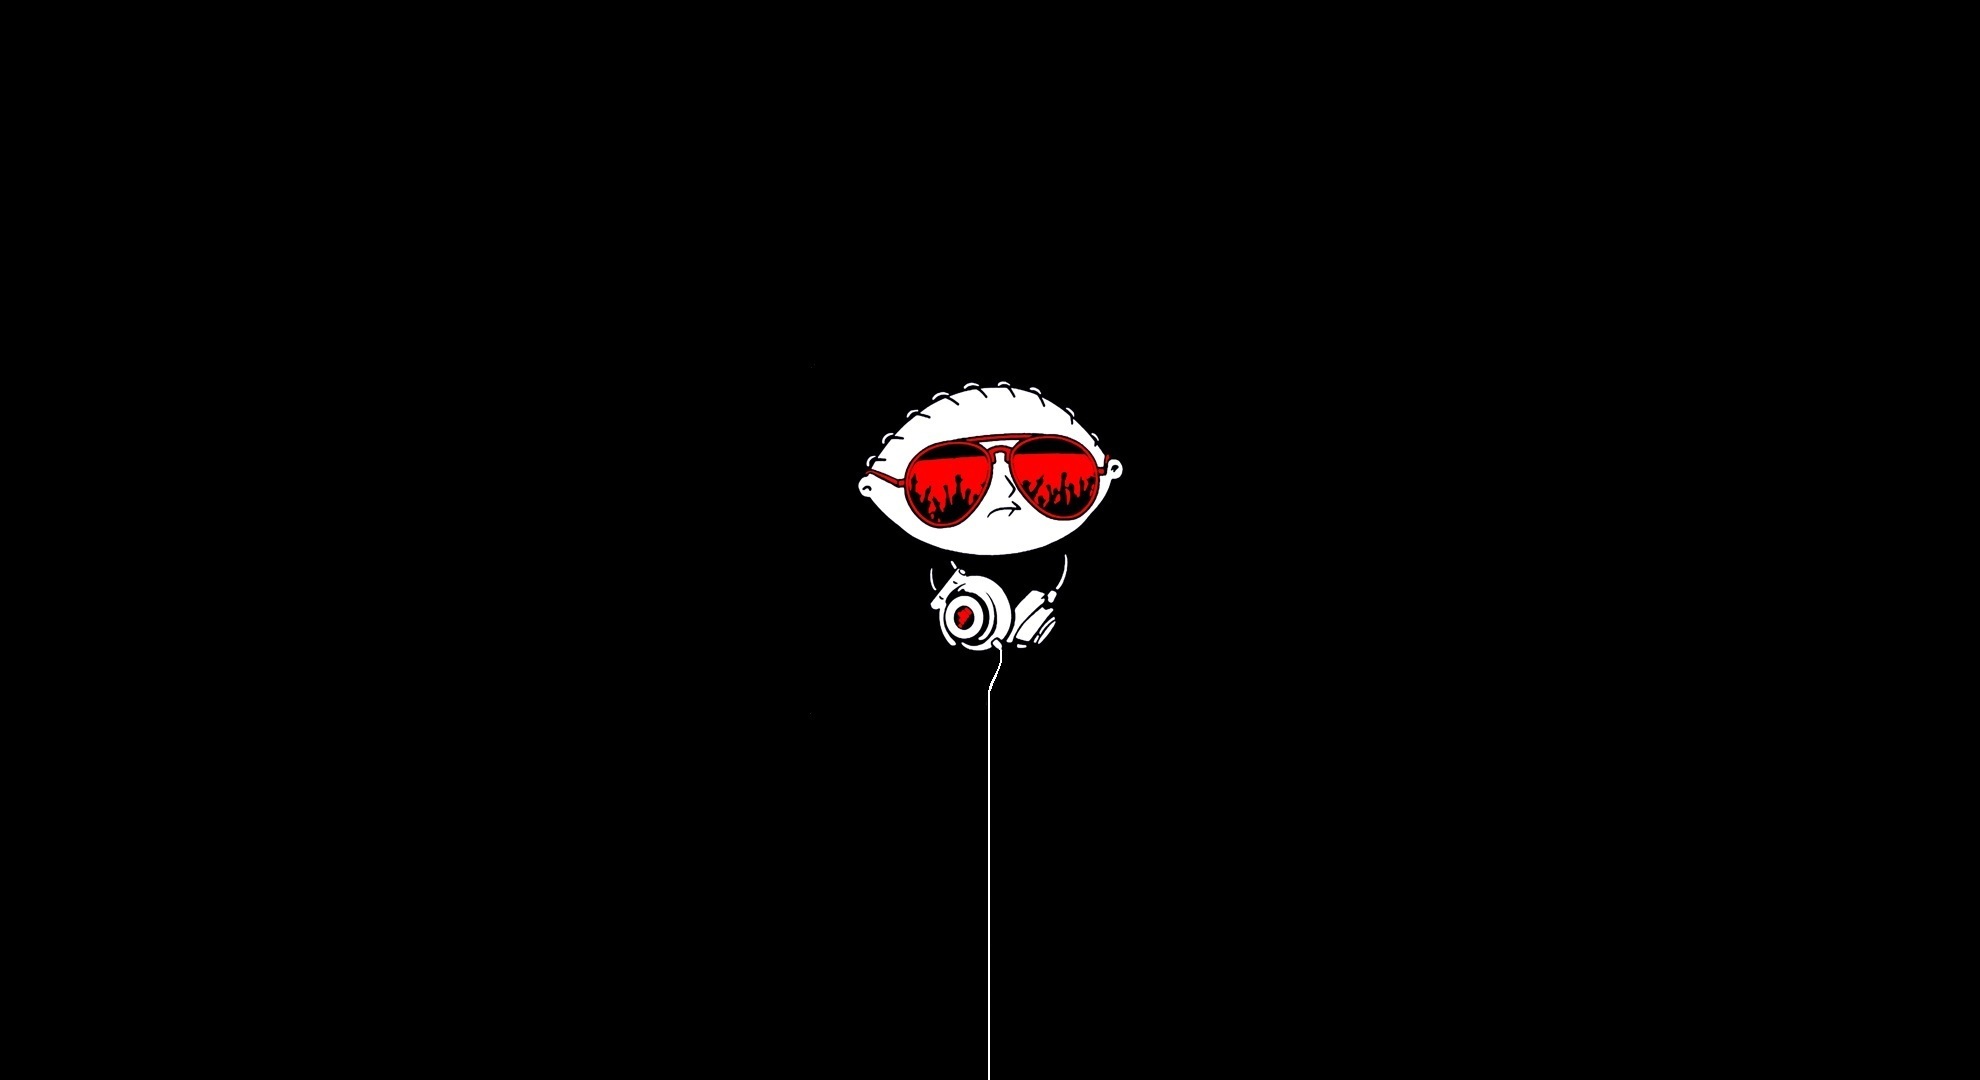 20205 free wallpaper 240x320 for phone, download images headphones, black, background, music 240x320 for mobile